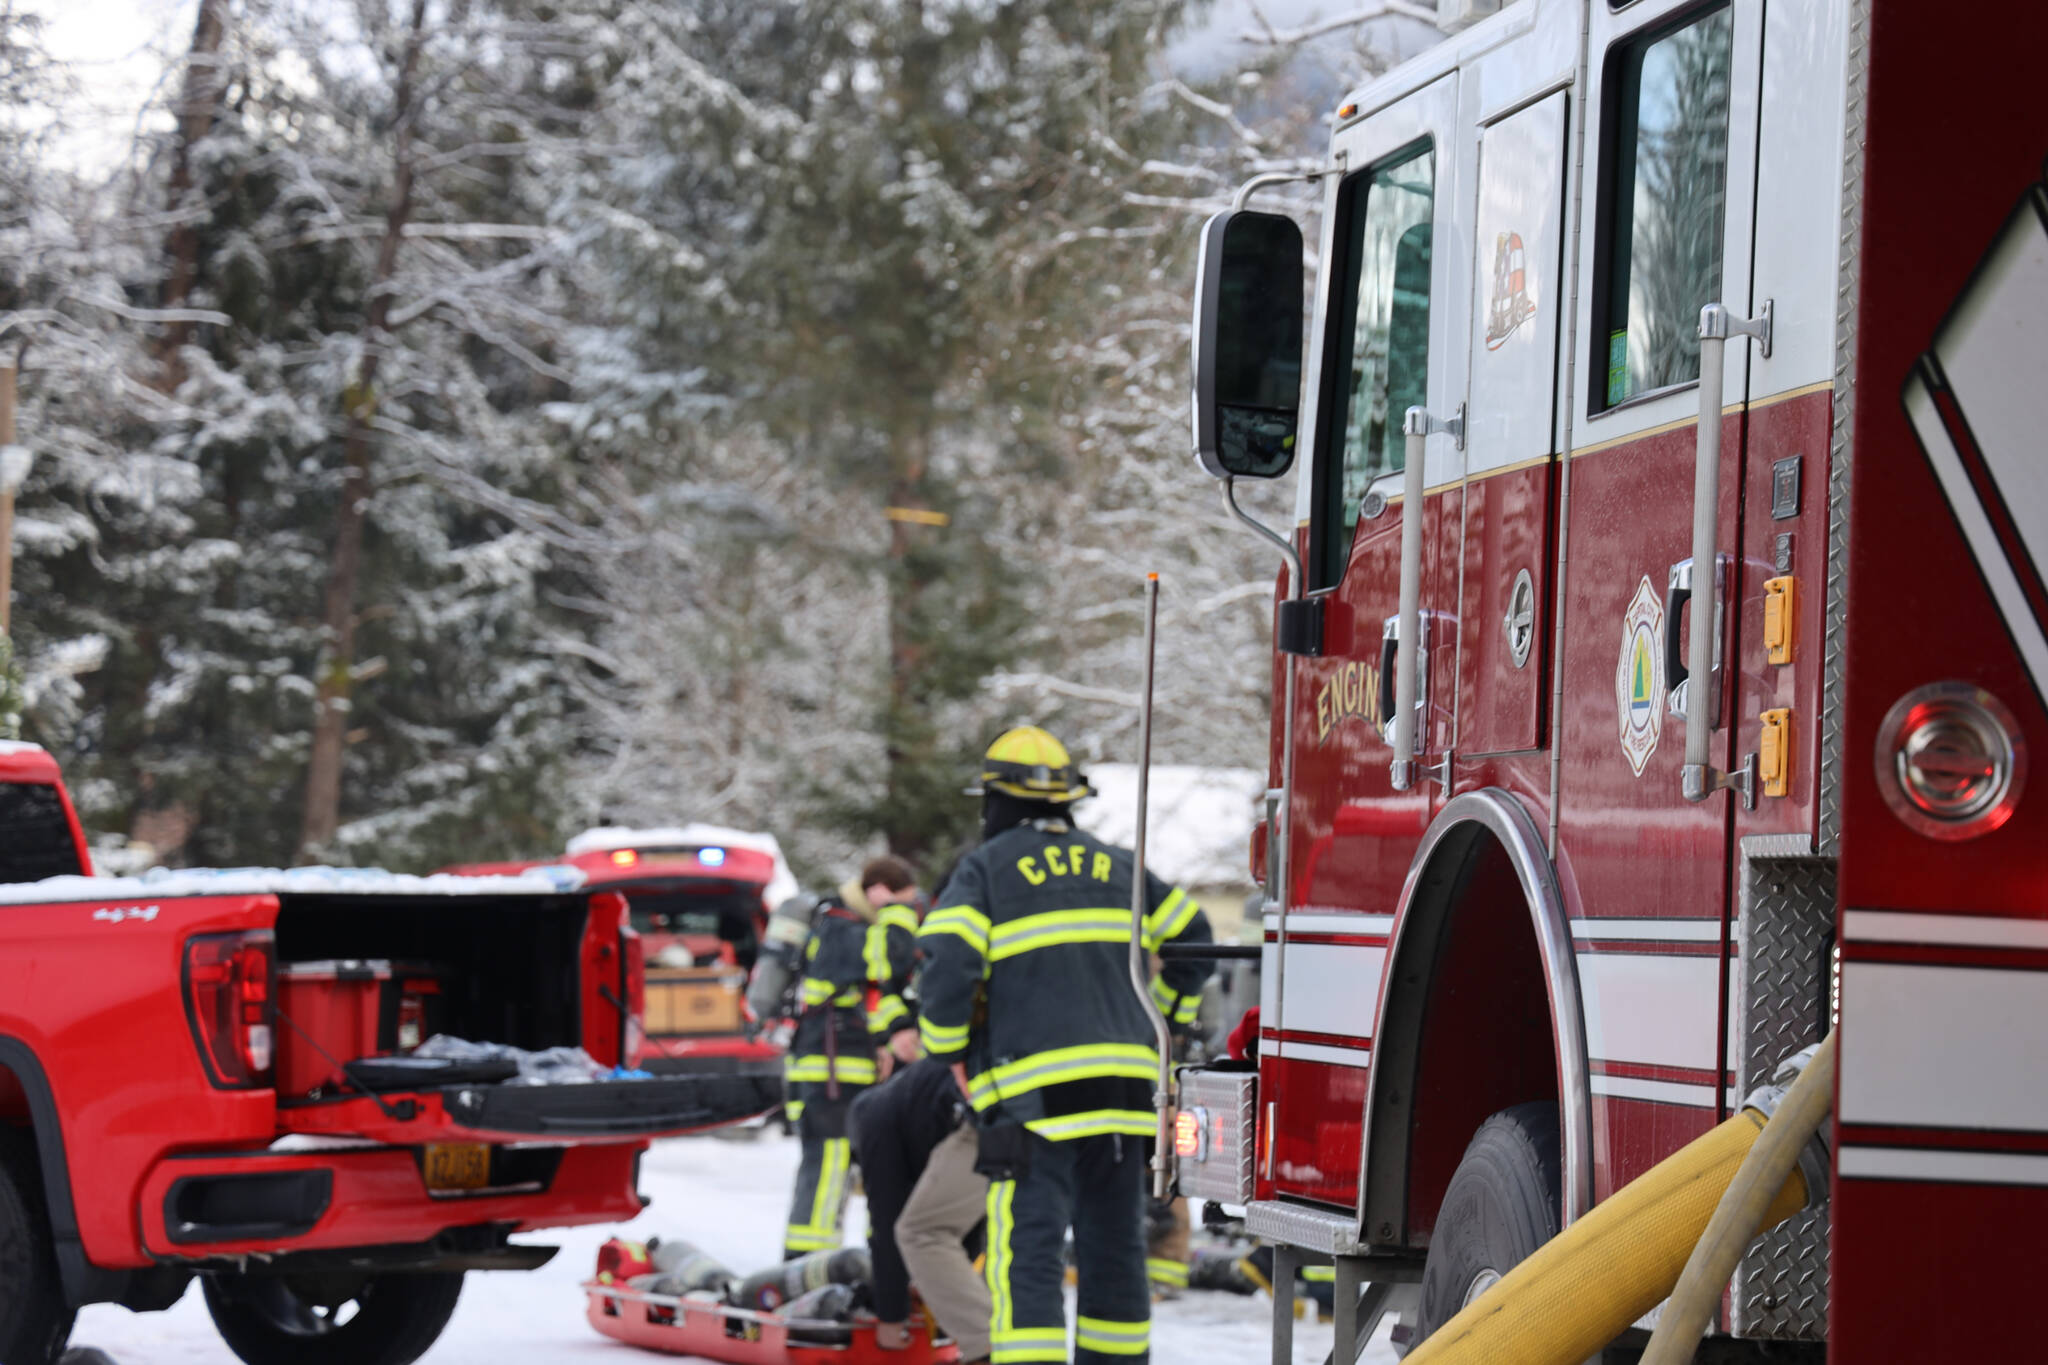 Capital City Fire/Rescue firefighters move to extinguish a trailer fire in early March. CCFR officials talk about the importance of staying fire safe as spring approaches. (Clarise Larson / Juneau Empire File)